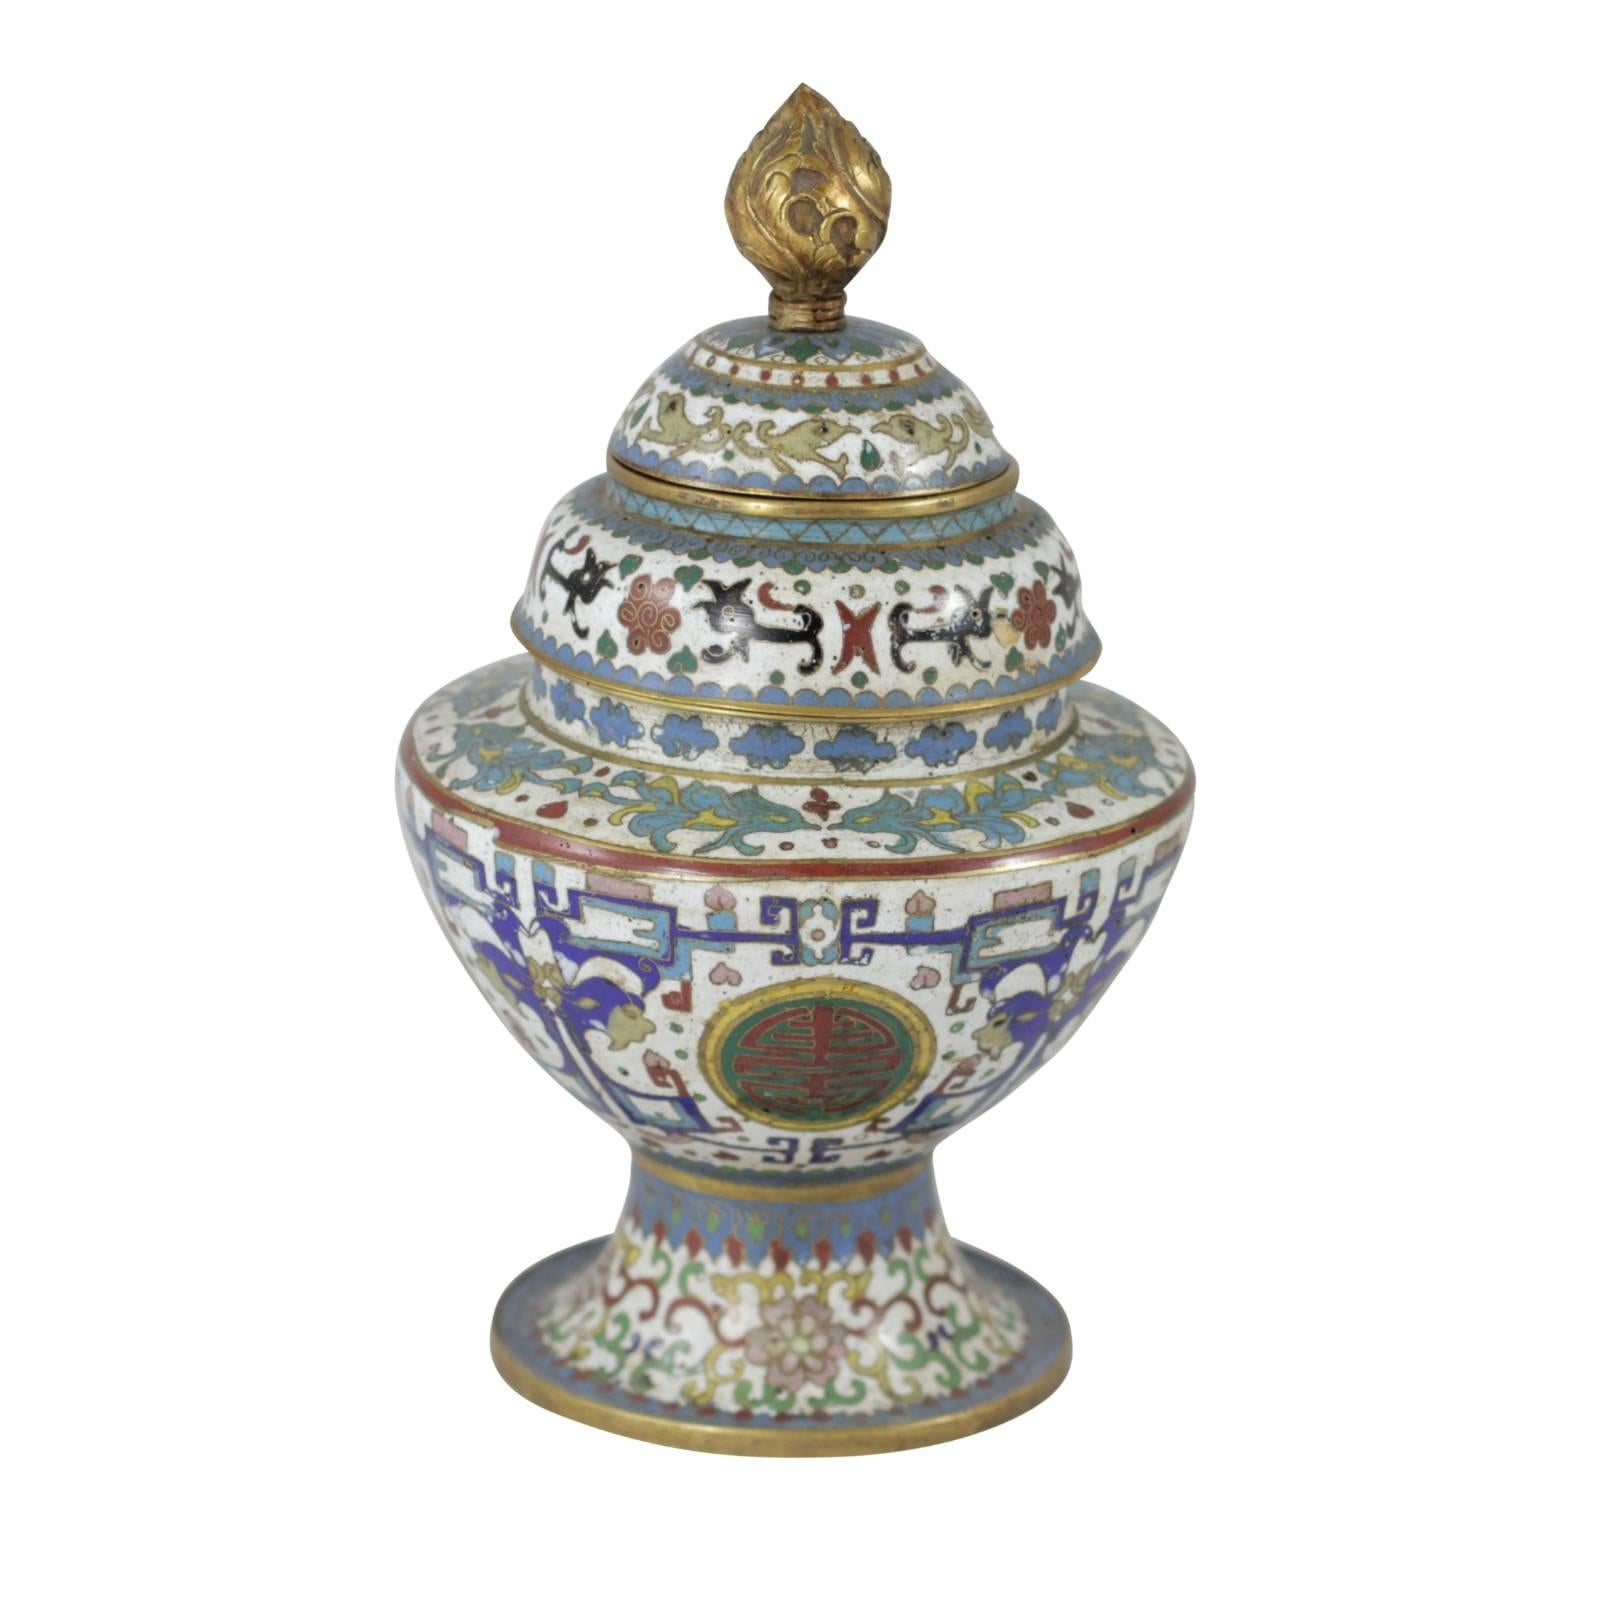 This cloisonné vessel from early 20th century, China is a curious vase made up of three separate chambers. Its colorful design in red, blue and green covers the white base with brass detailing and finial.